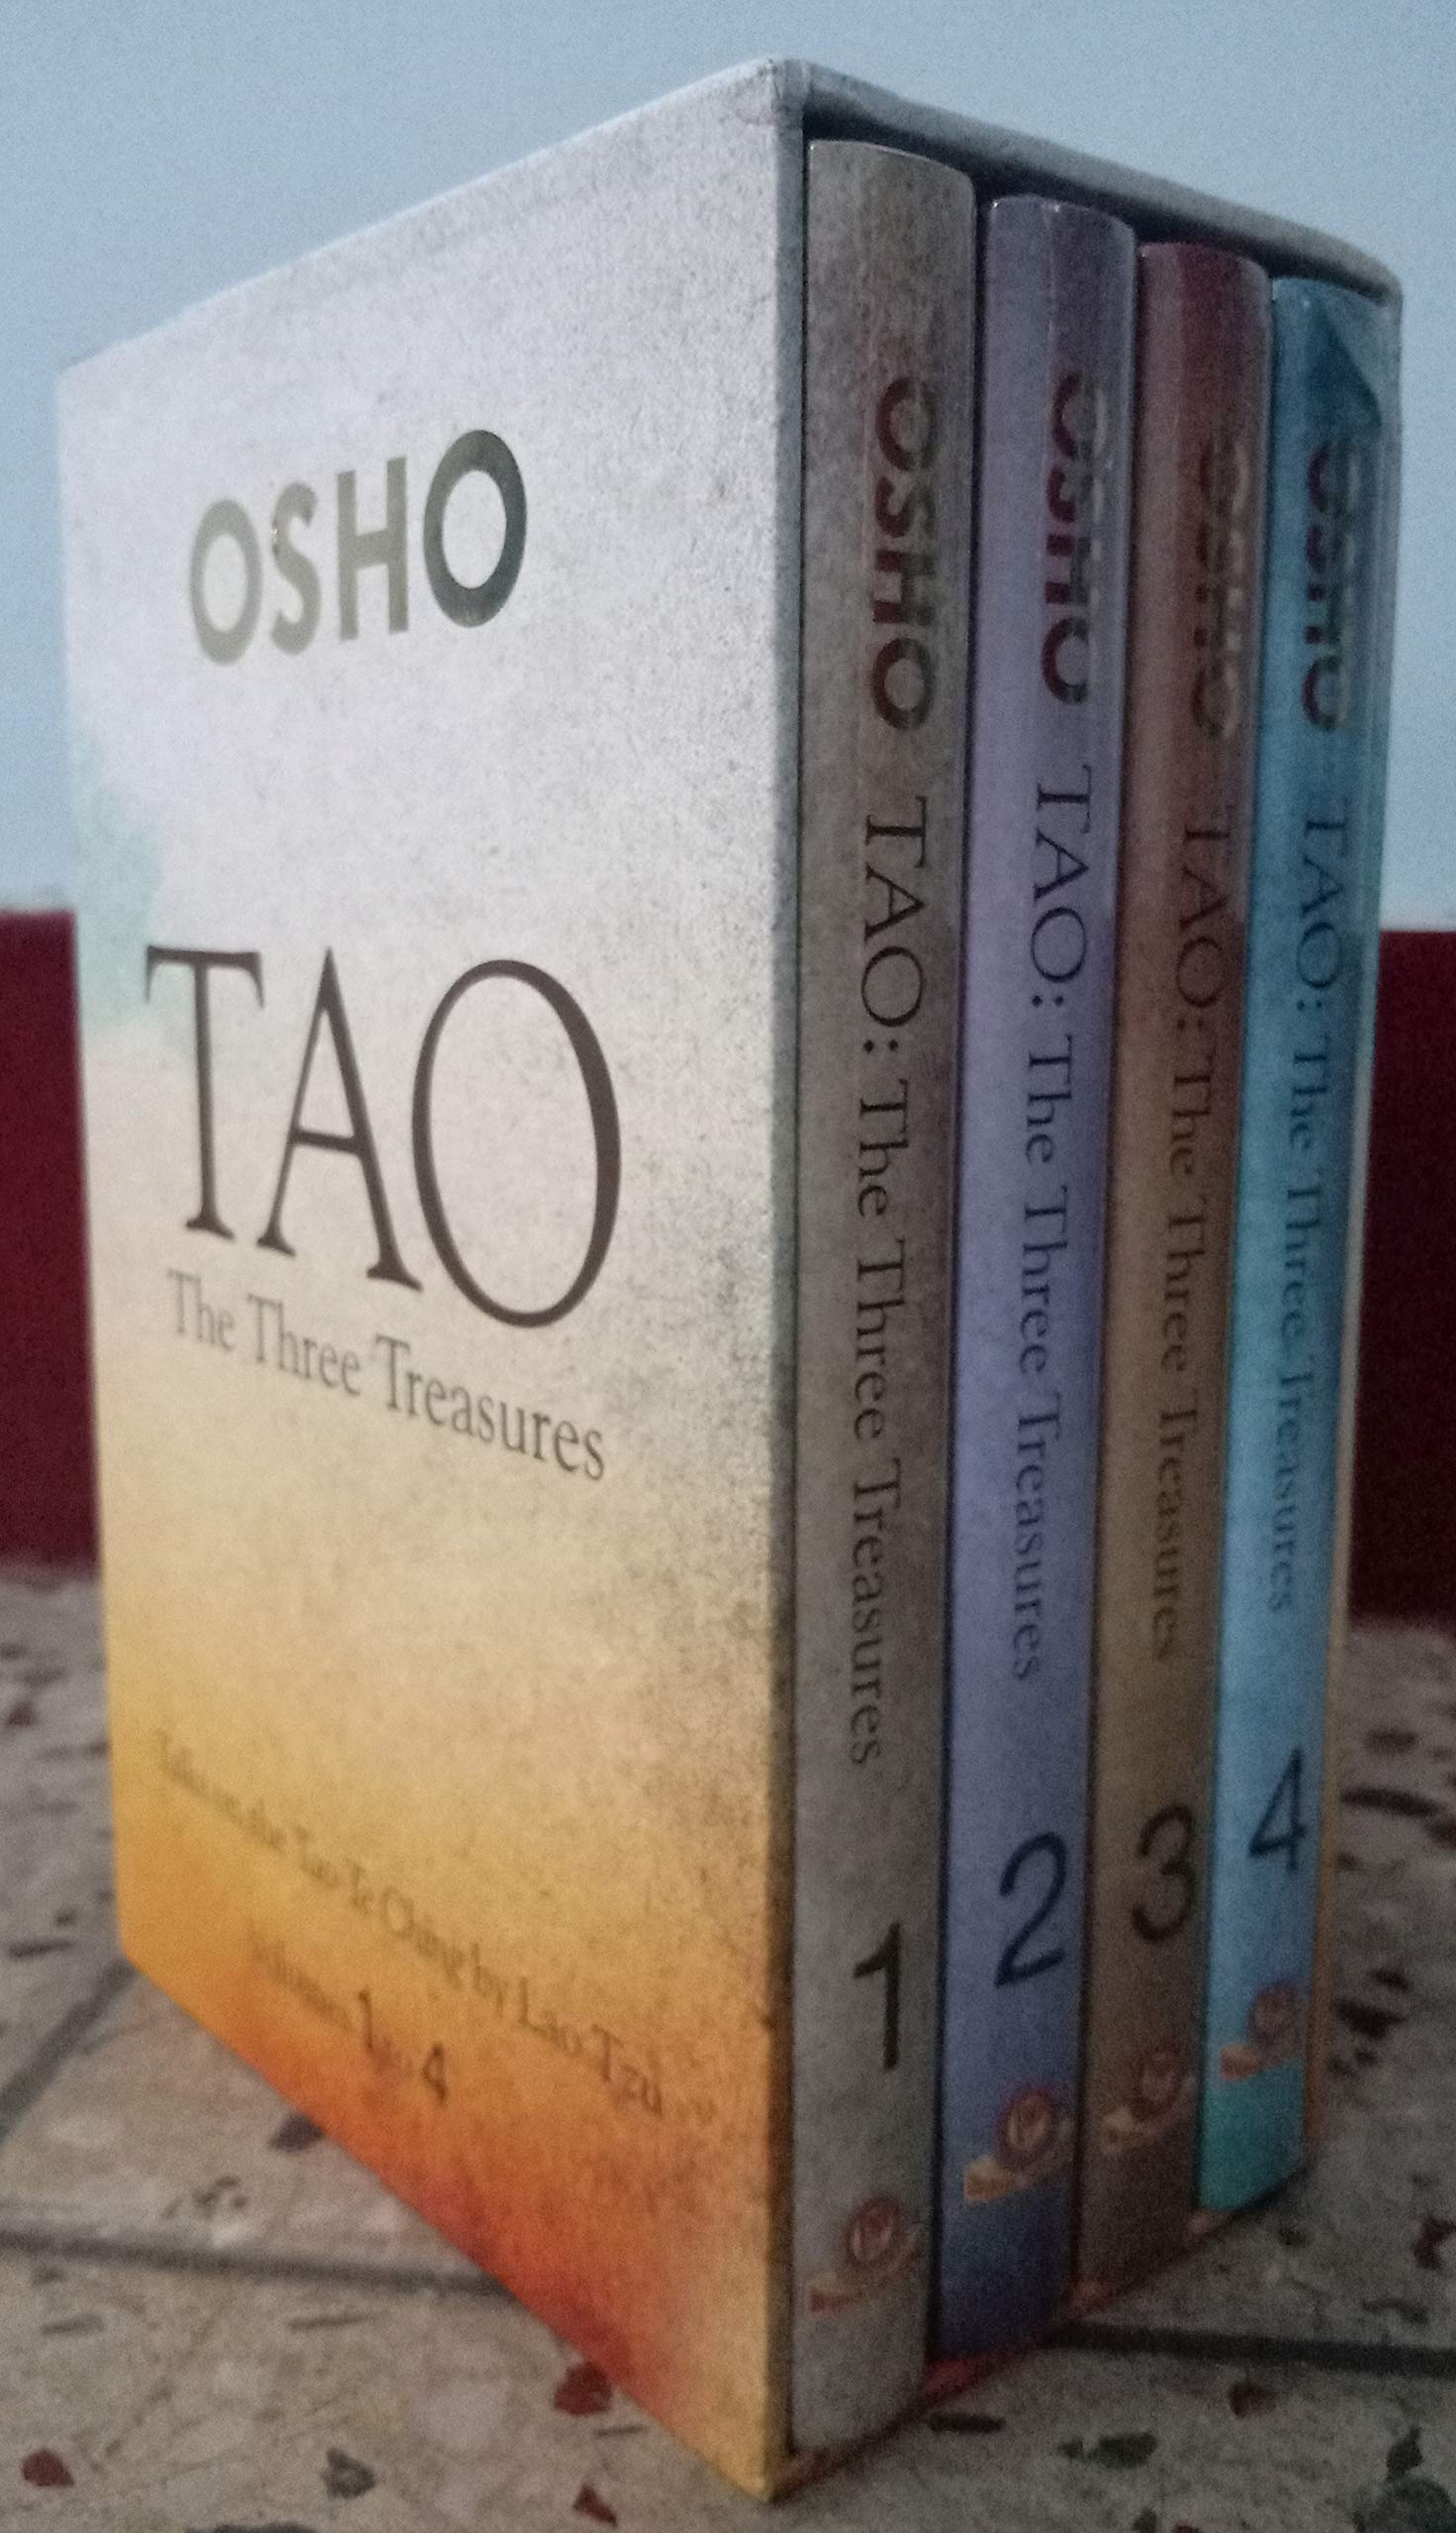 Tao The Three Treasures Volumes 1 to 4 by Osho